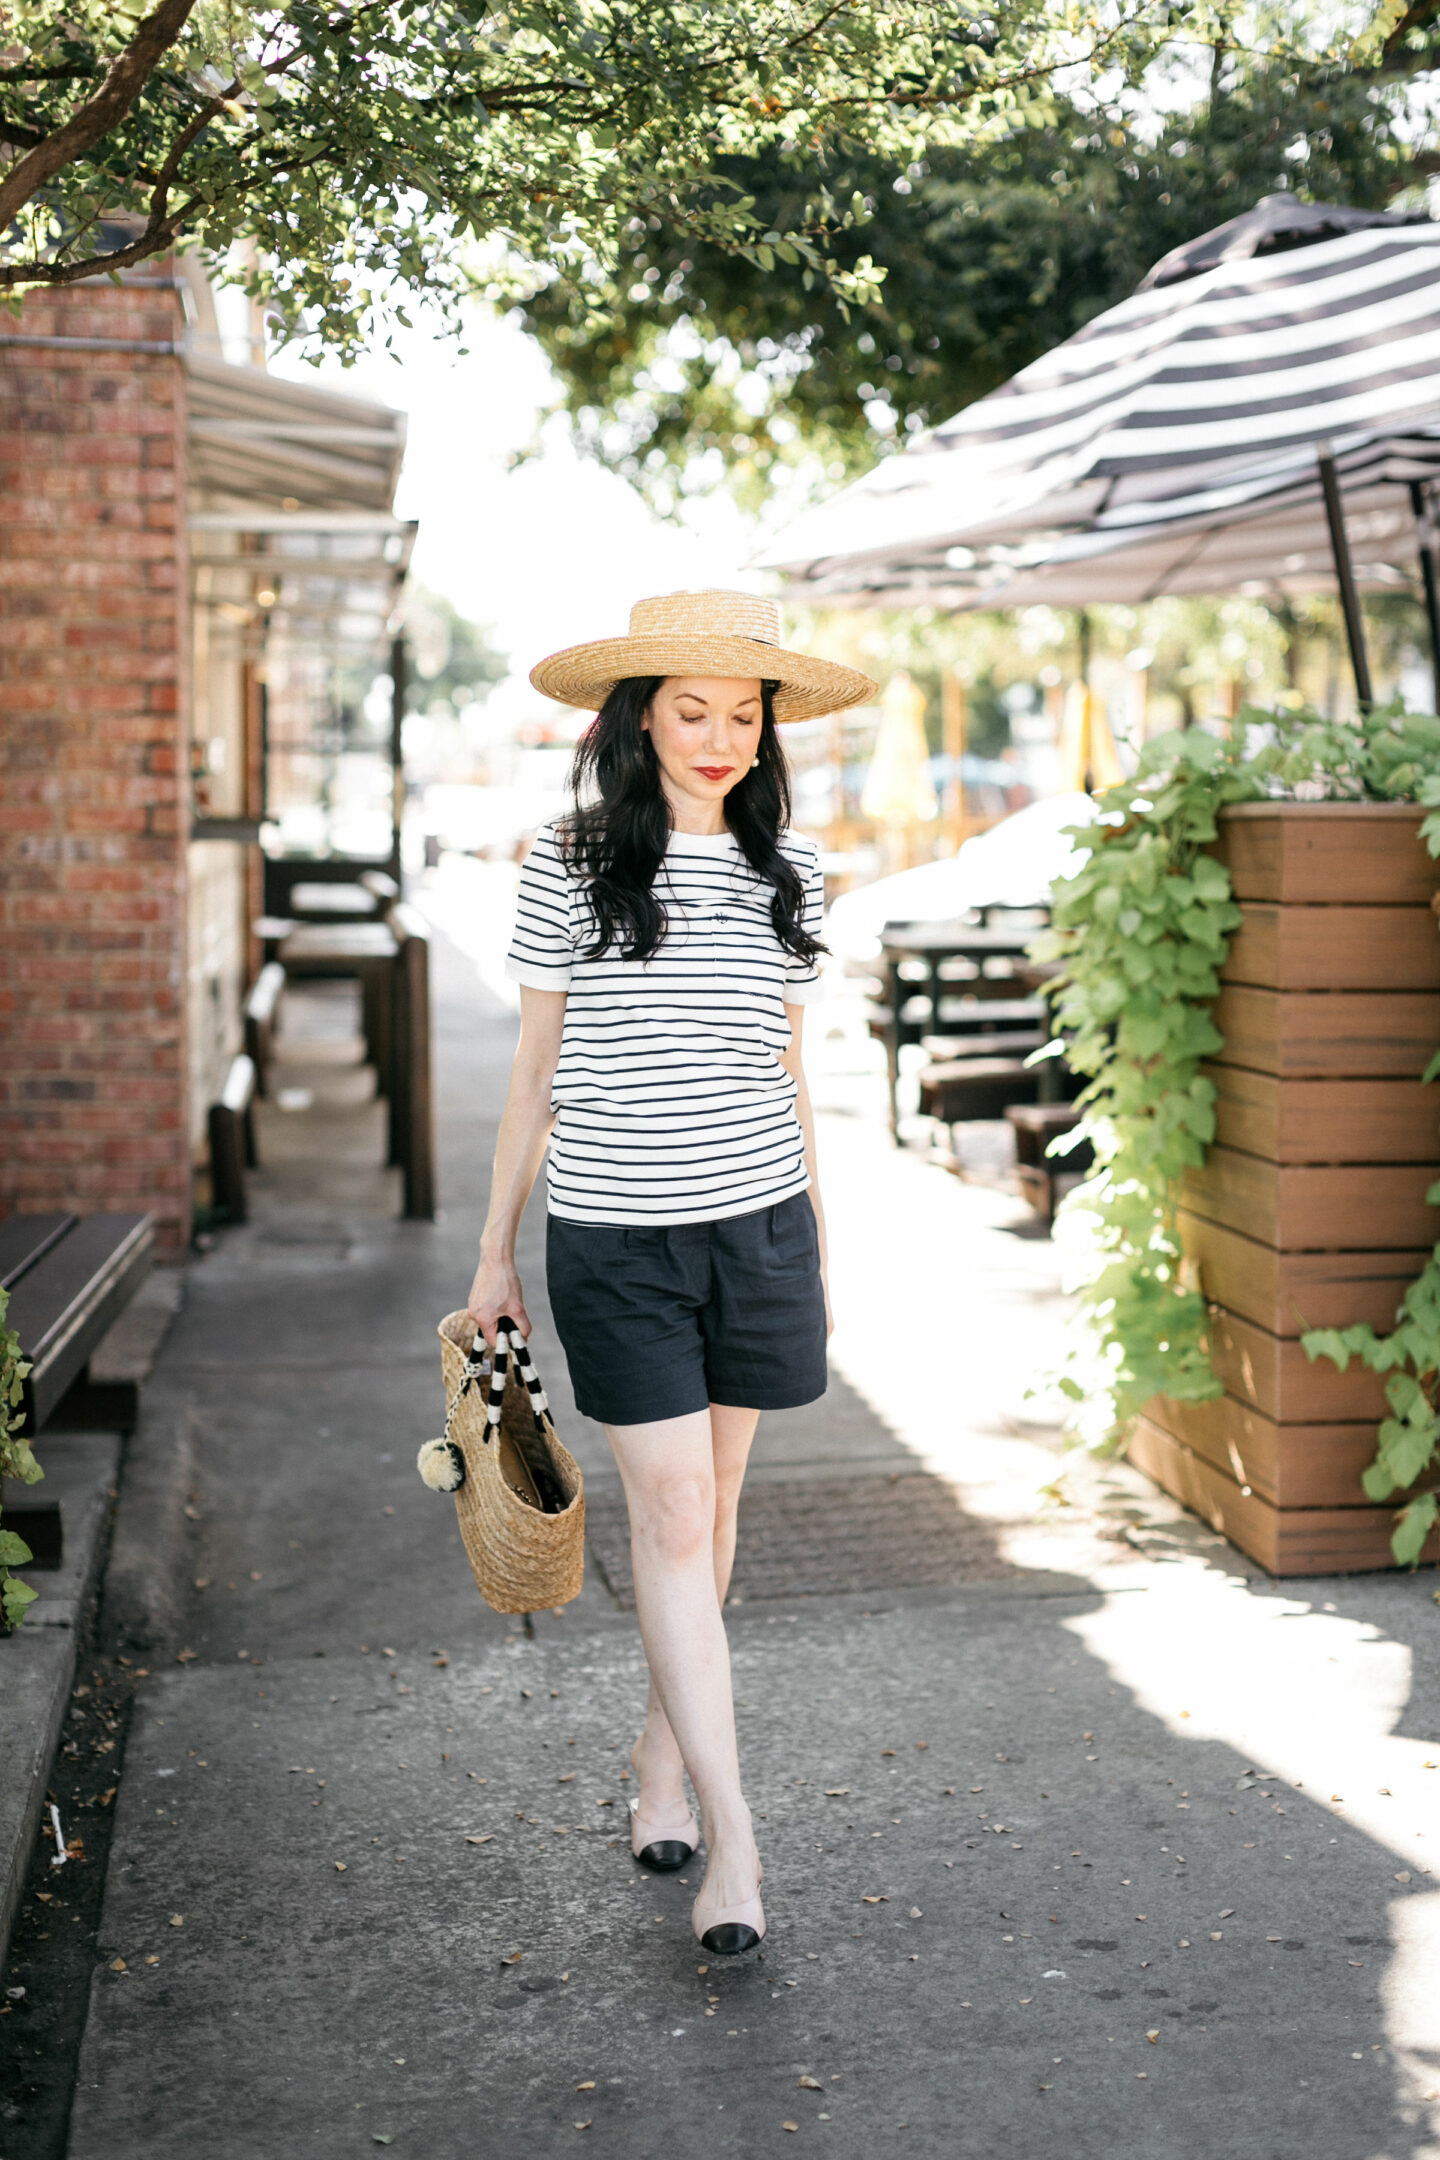 Kiel James Patrick Tee Shirt styled for Fall by top Dallas fashion blogger, Pretty Little Shoppers